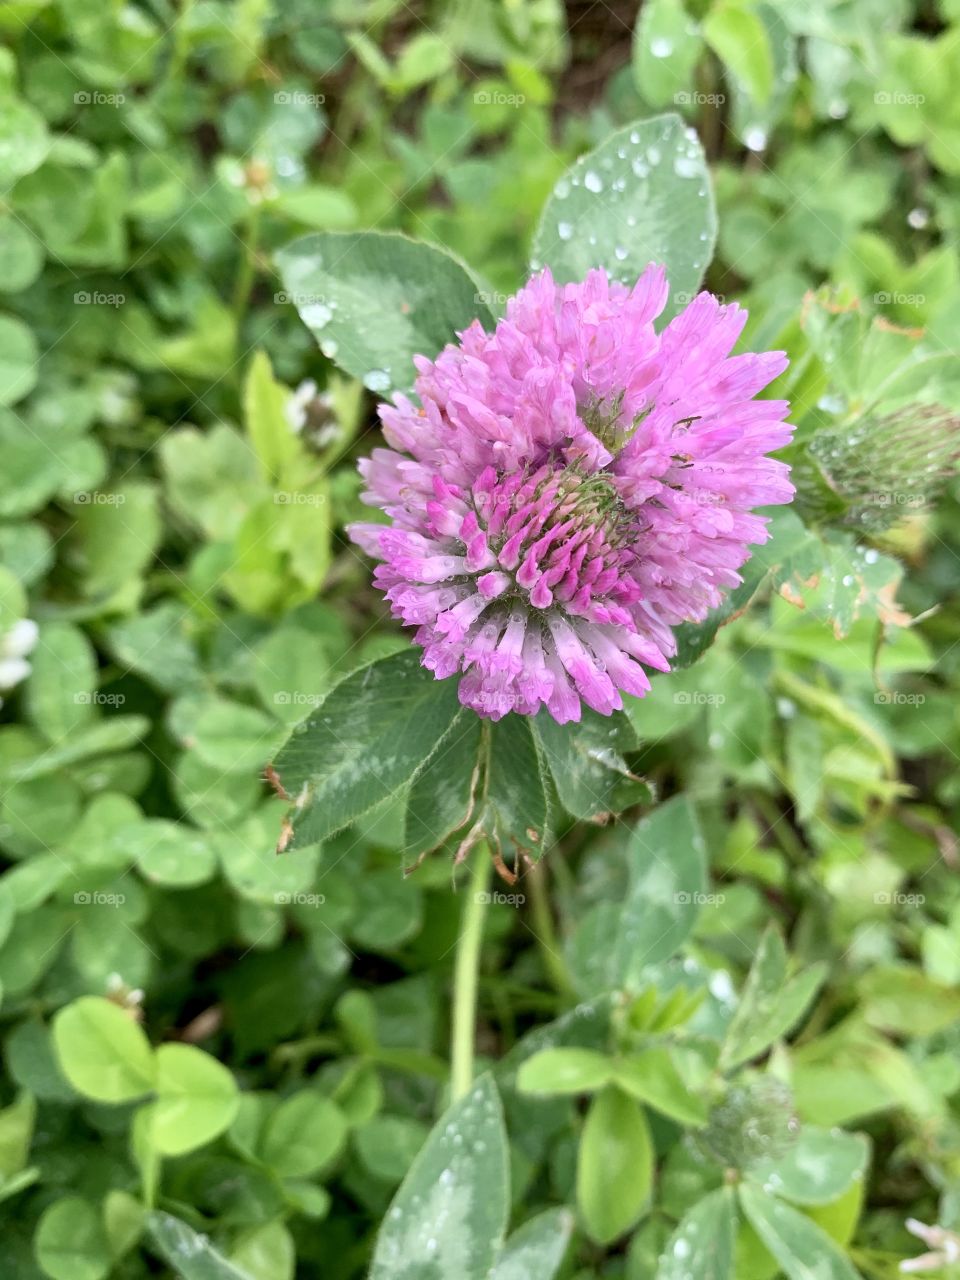 Closeup of a single blooming Red Clover blossom against s blurred green background 